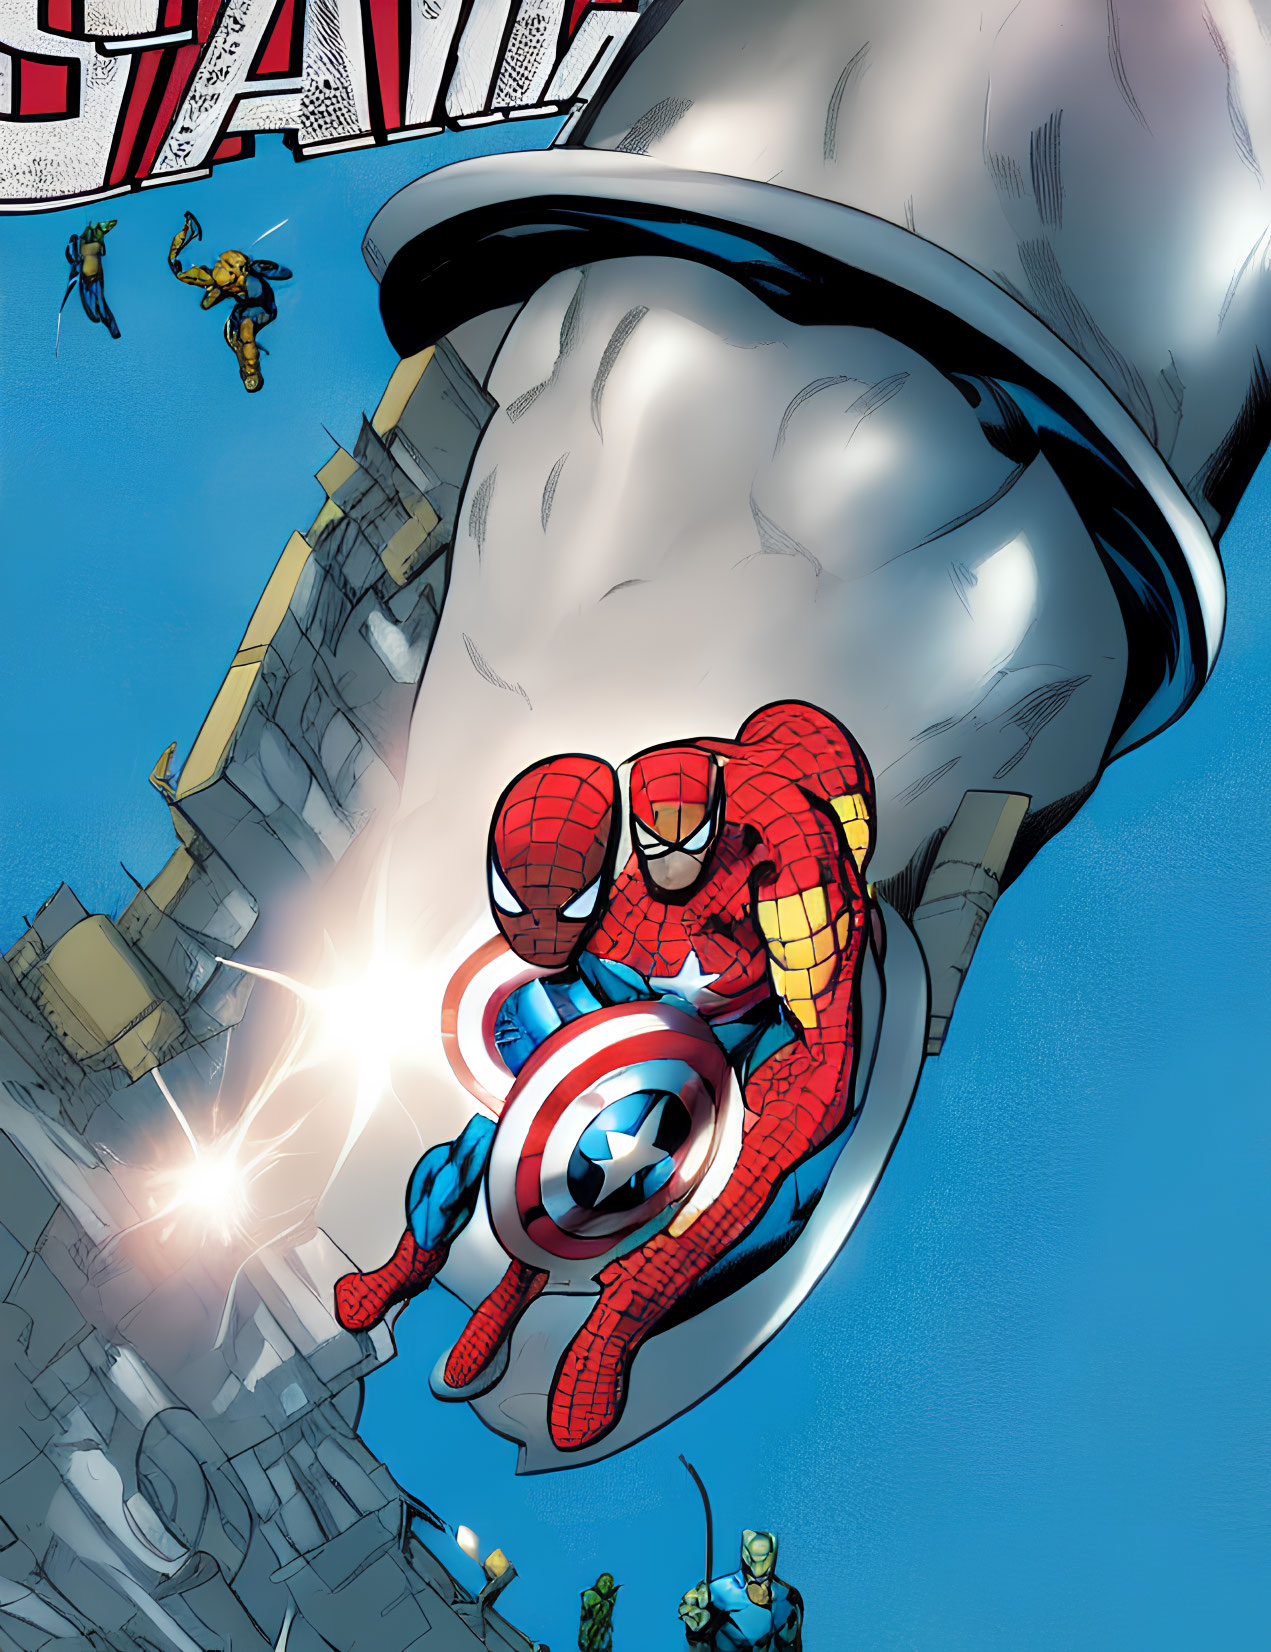 Superhero Spider-Man on Captain America's shield in mid-air with debris and characters around.